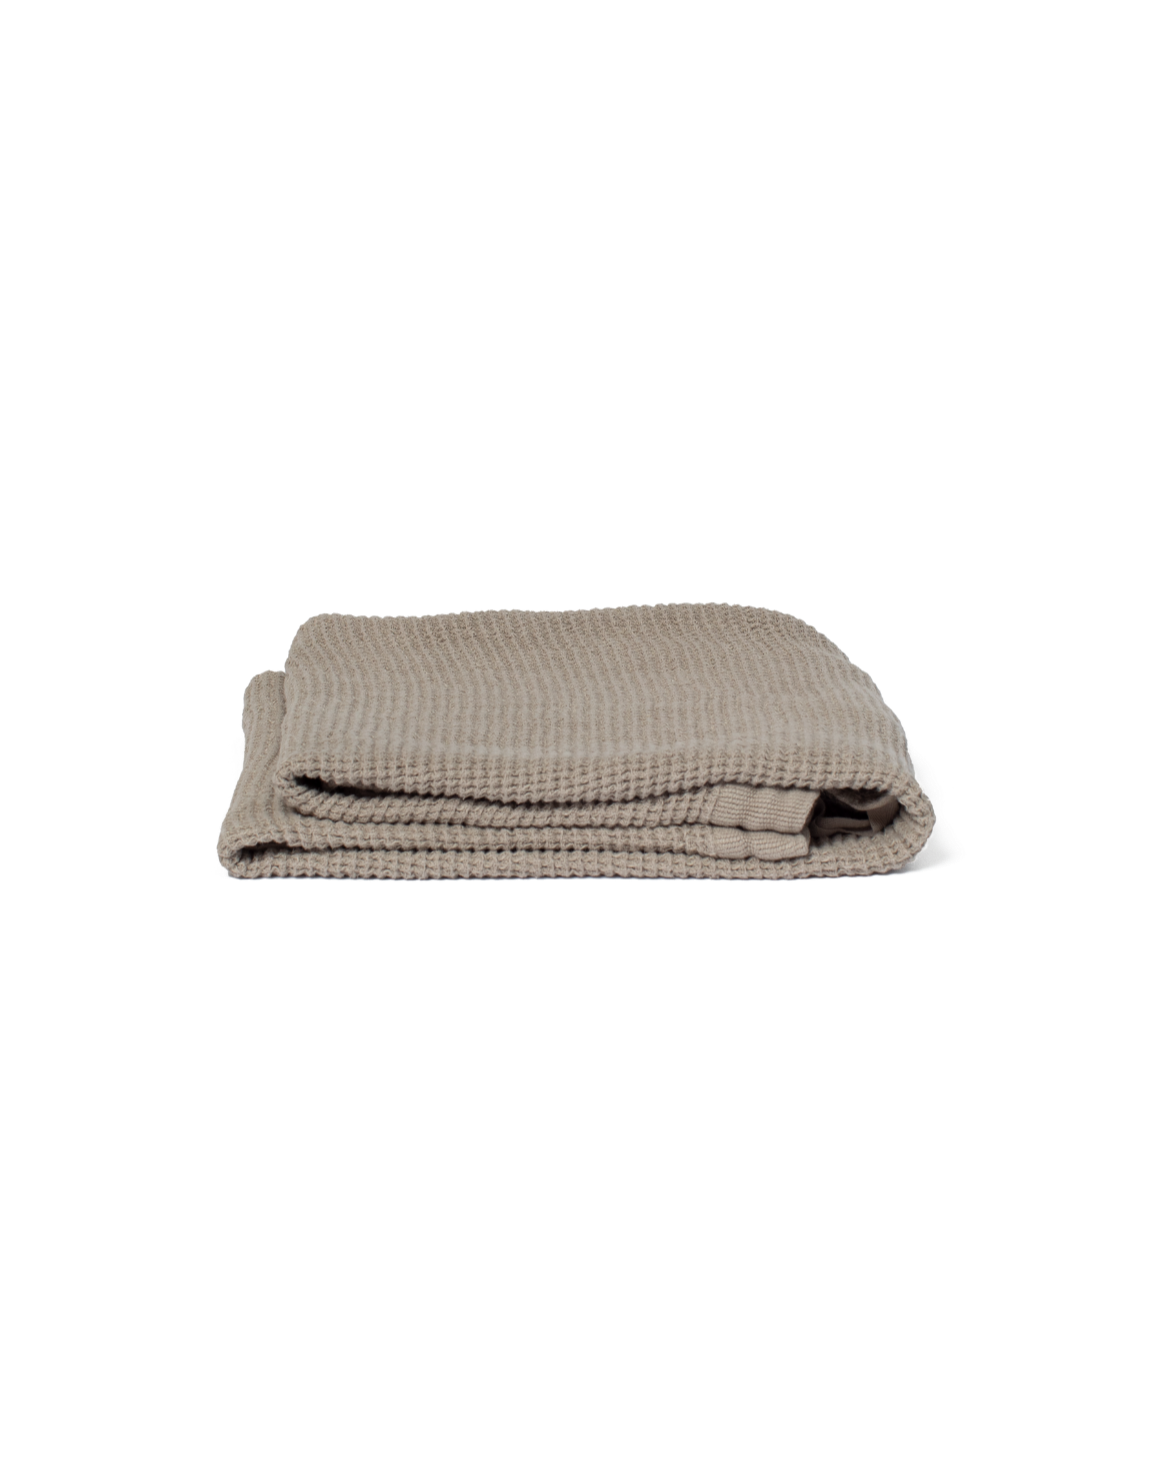 HANDMADE WAFFLE LINEN KITCHEN TOWEL IN TAUPE GREY – Ellei Home